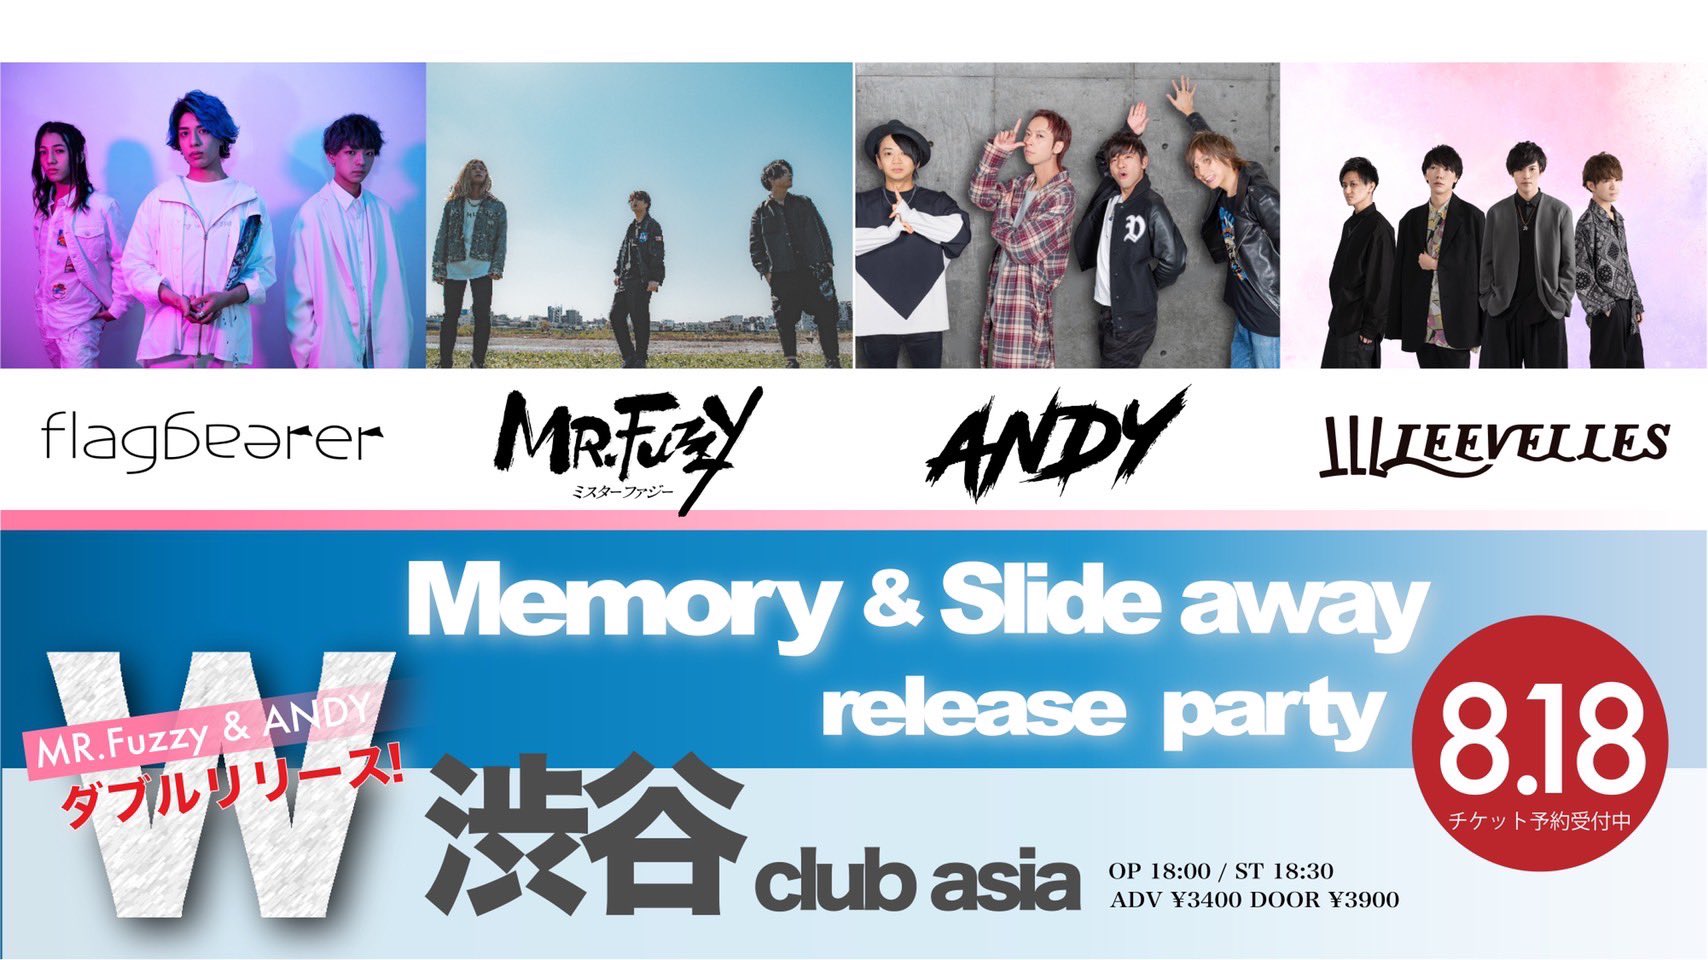 Memory & Slide away release party